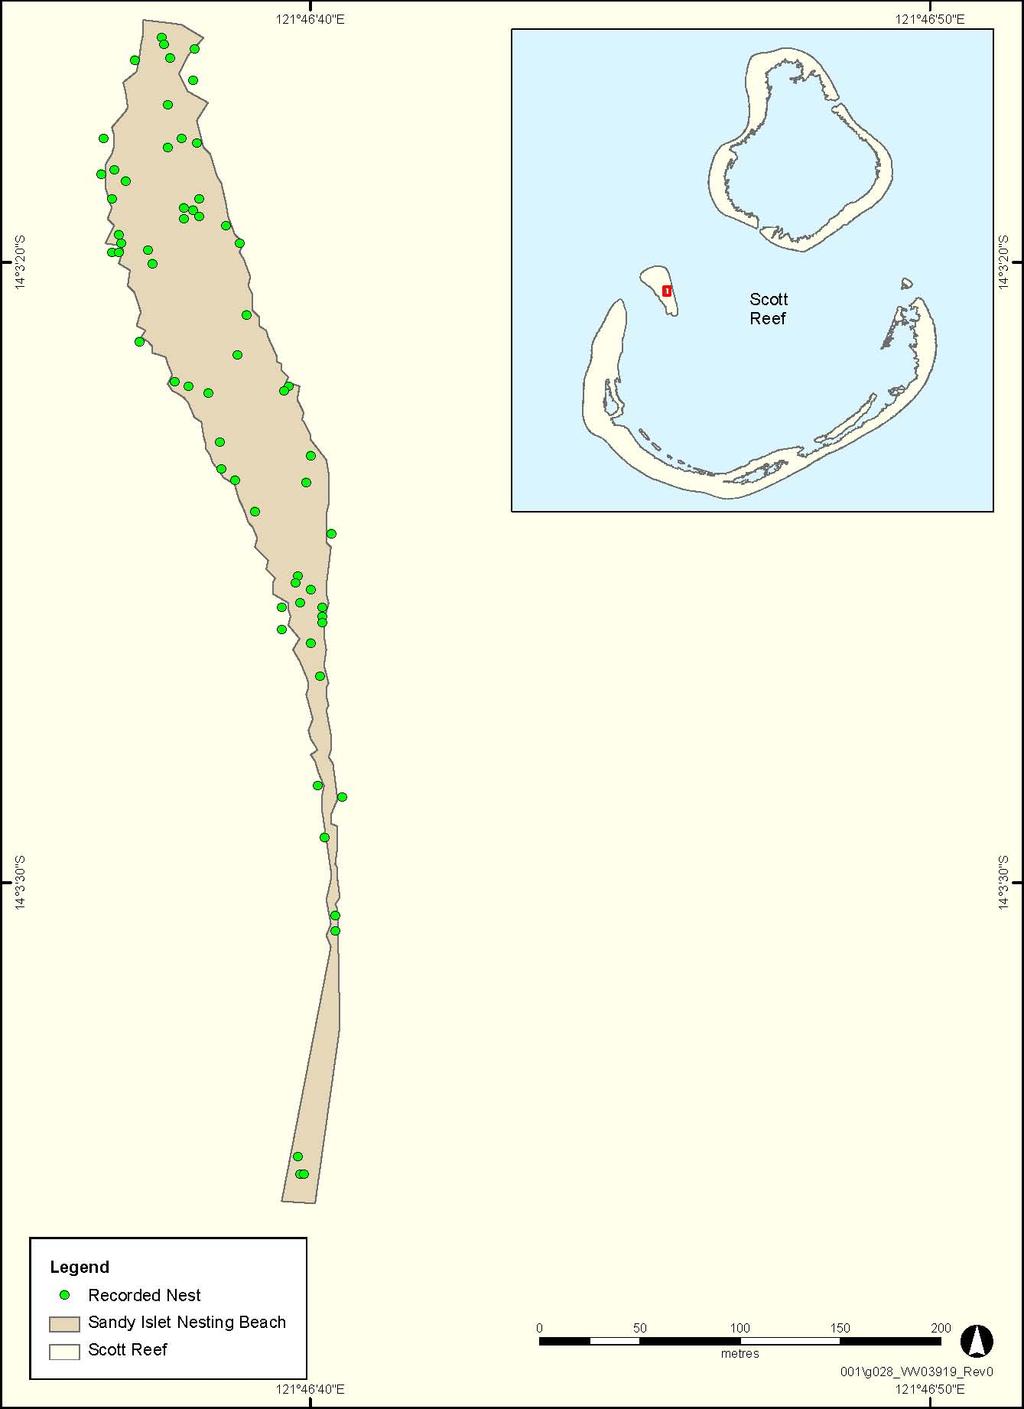 Figure 3 1: Nesting area at Sandy Islet was identified by body pits on arrival (shaded